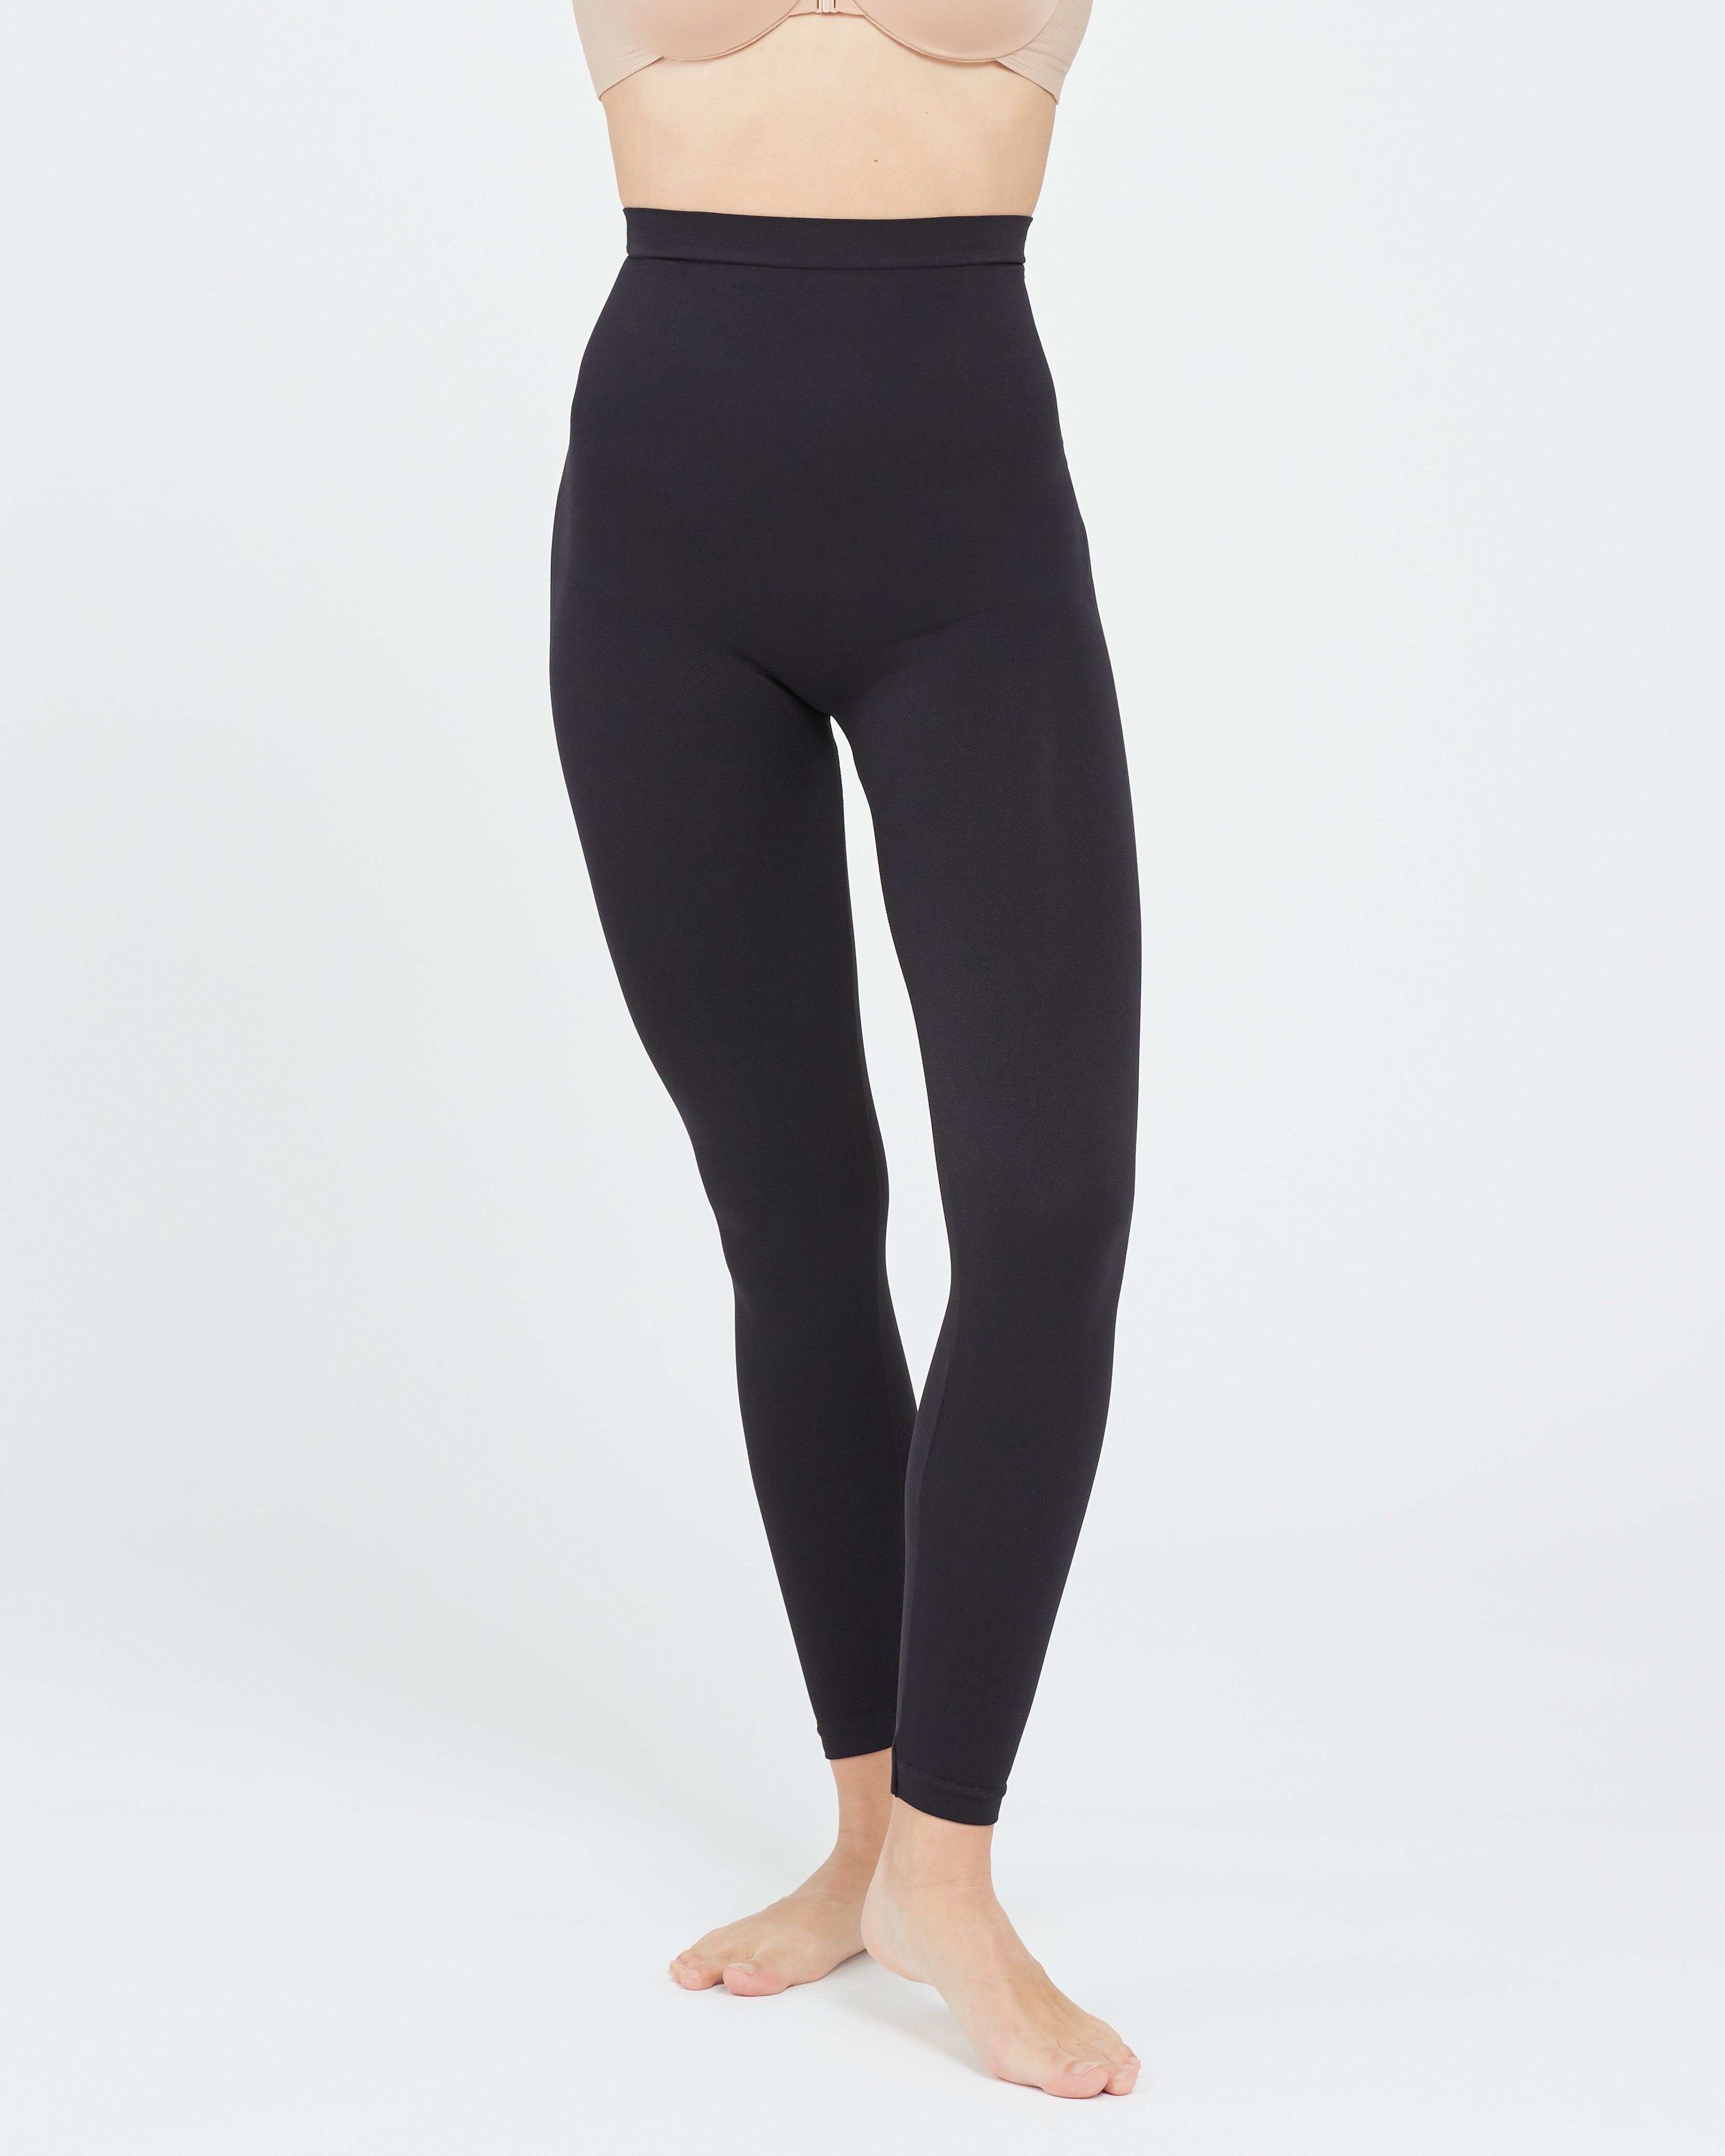 Maine Strong Compression Legging